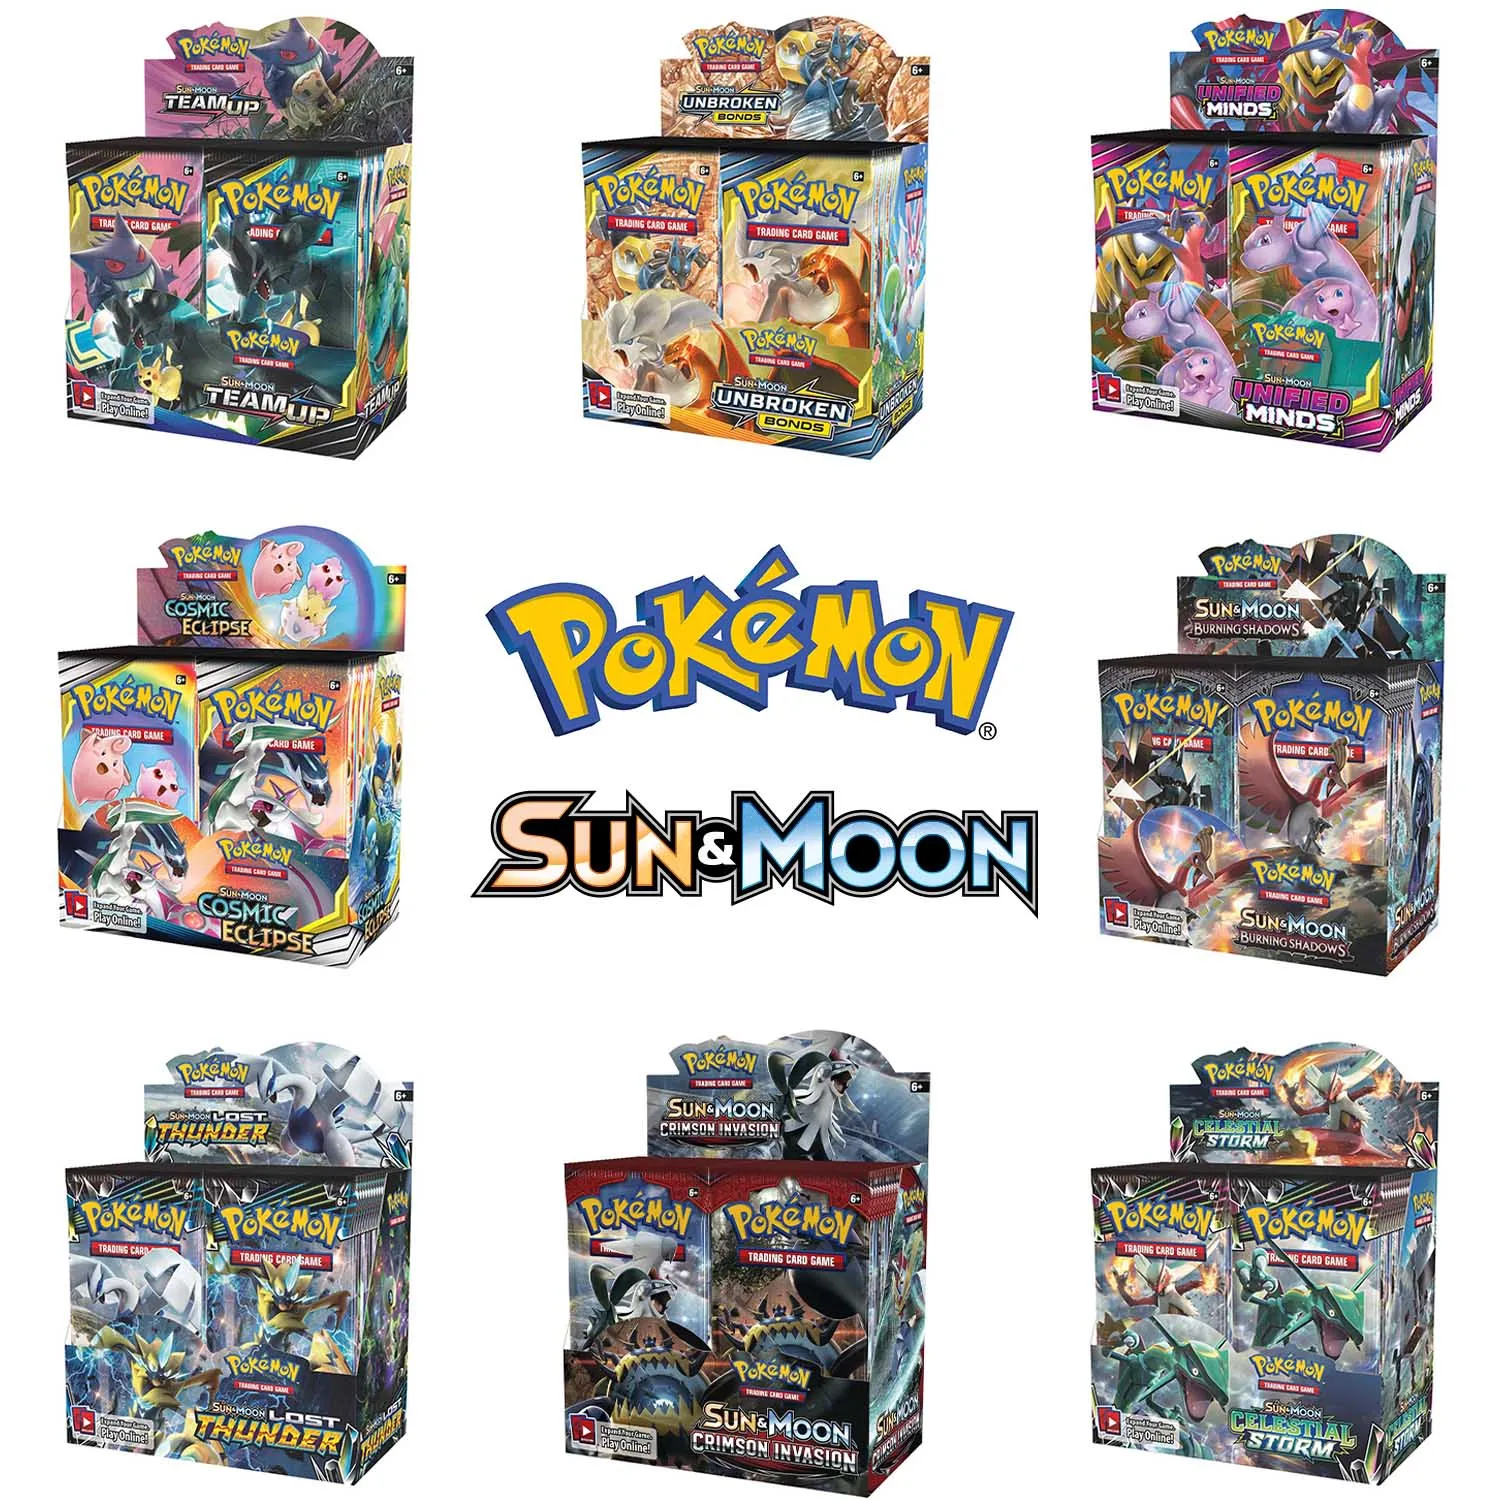 324 Pokemon Card Pokemon Tcg: Sun and Moon Team Up Evolutions Booster Display Box (36 Packs) Game Kids Collection Toys Gift